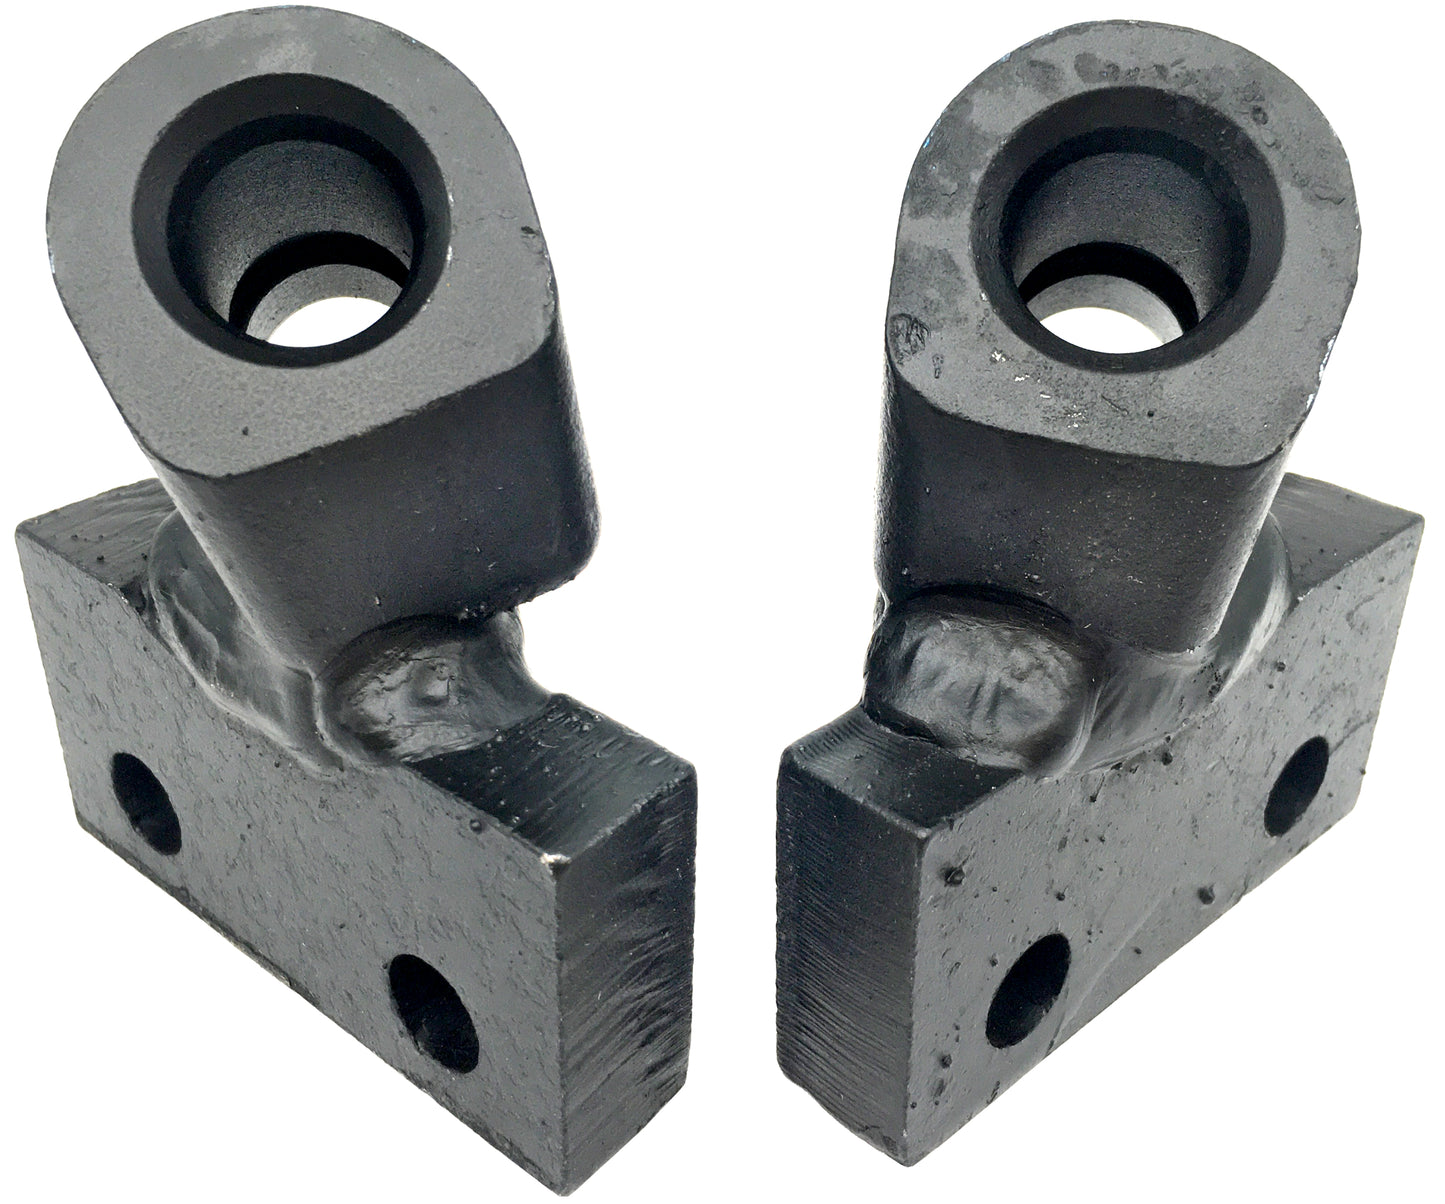 LH & RH Rock Chain Trenching Adapters - 136040 & 136041 - 2" Pitch, 6" Cut, 19mm Condition: New